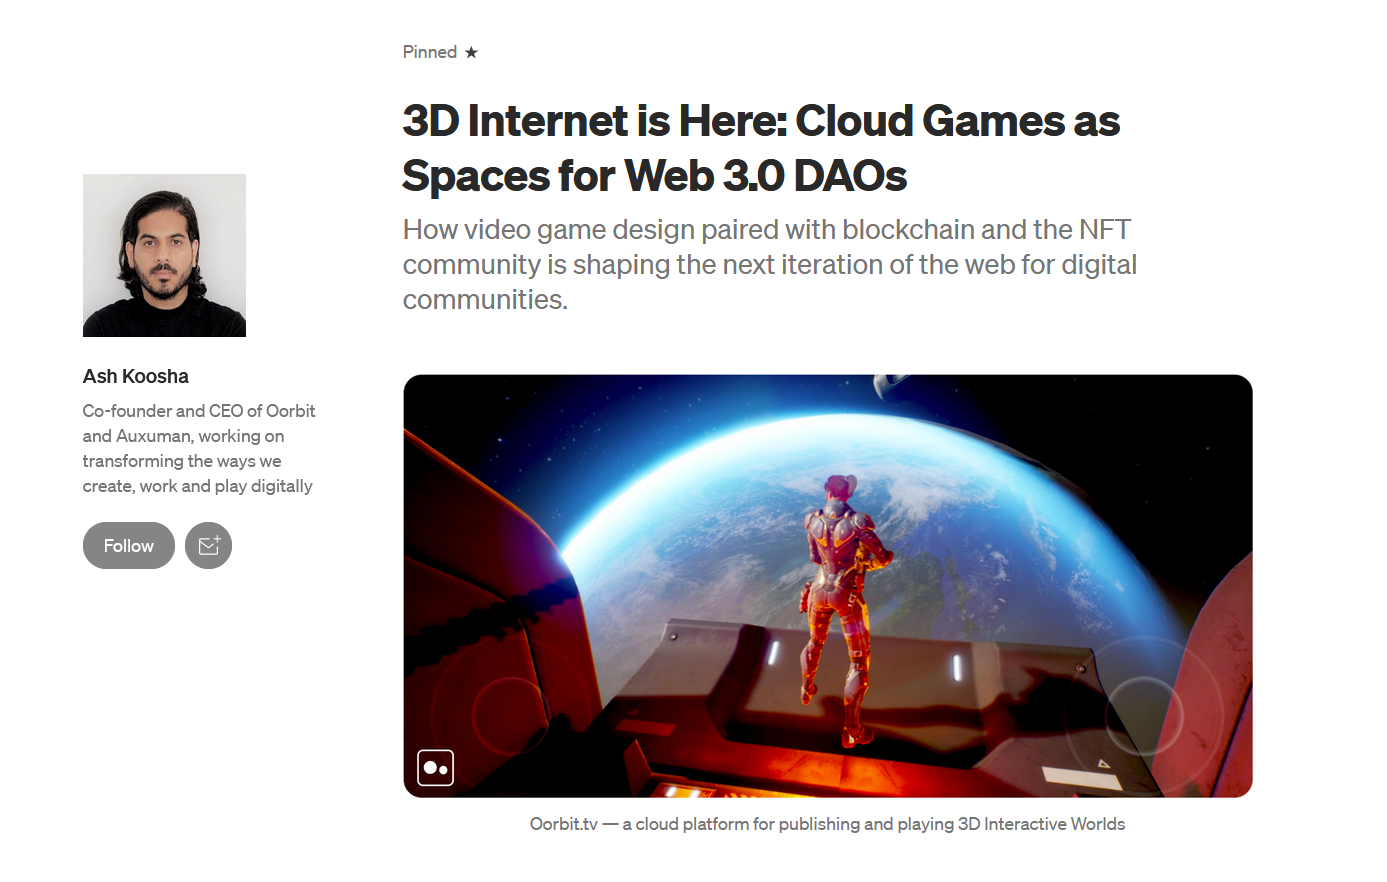 Medium article by Ash Koosha, listed as cofounder and CEO of 2 wacky named grift web3 startups. The article title reads: 3D internet is Here: Cloud Games as Spaces for web 3.0 DAOs